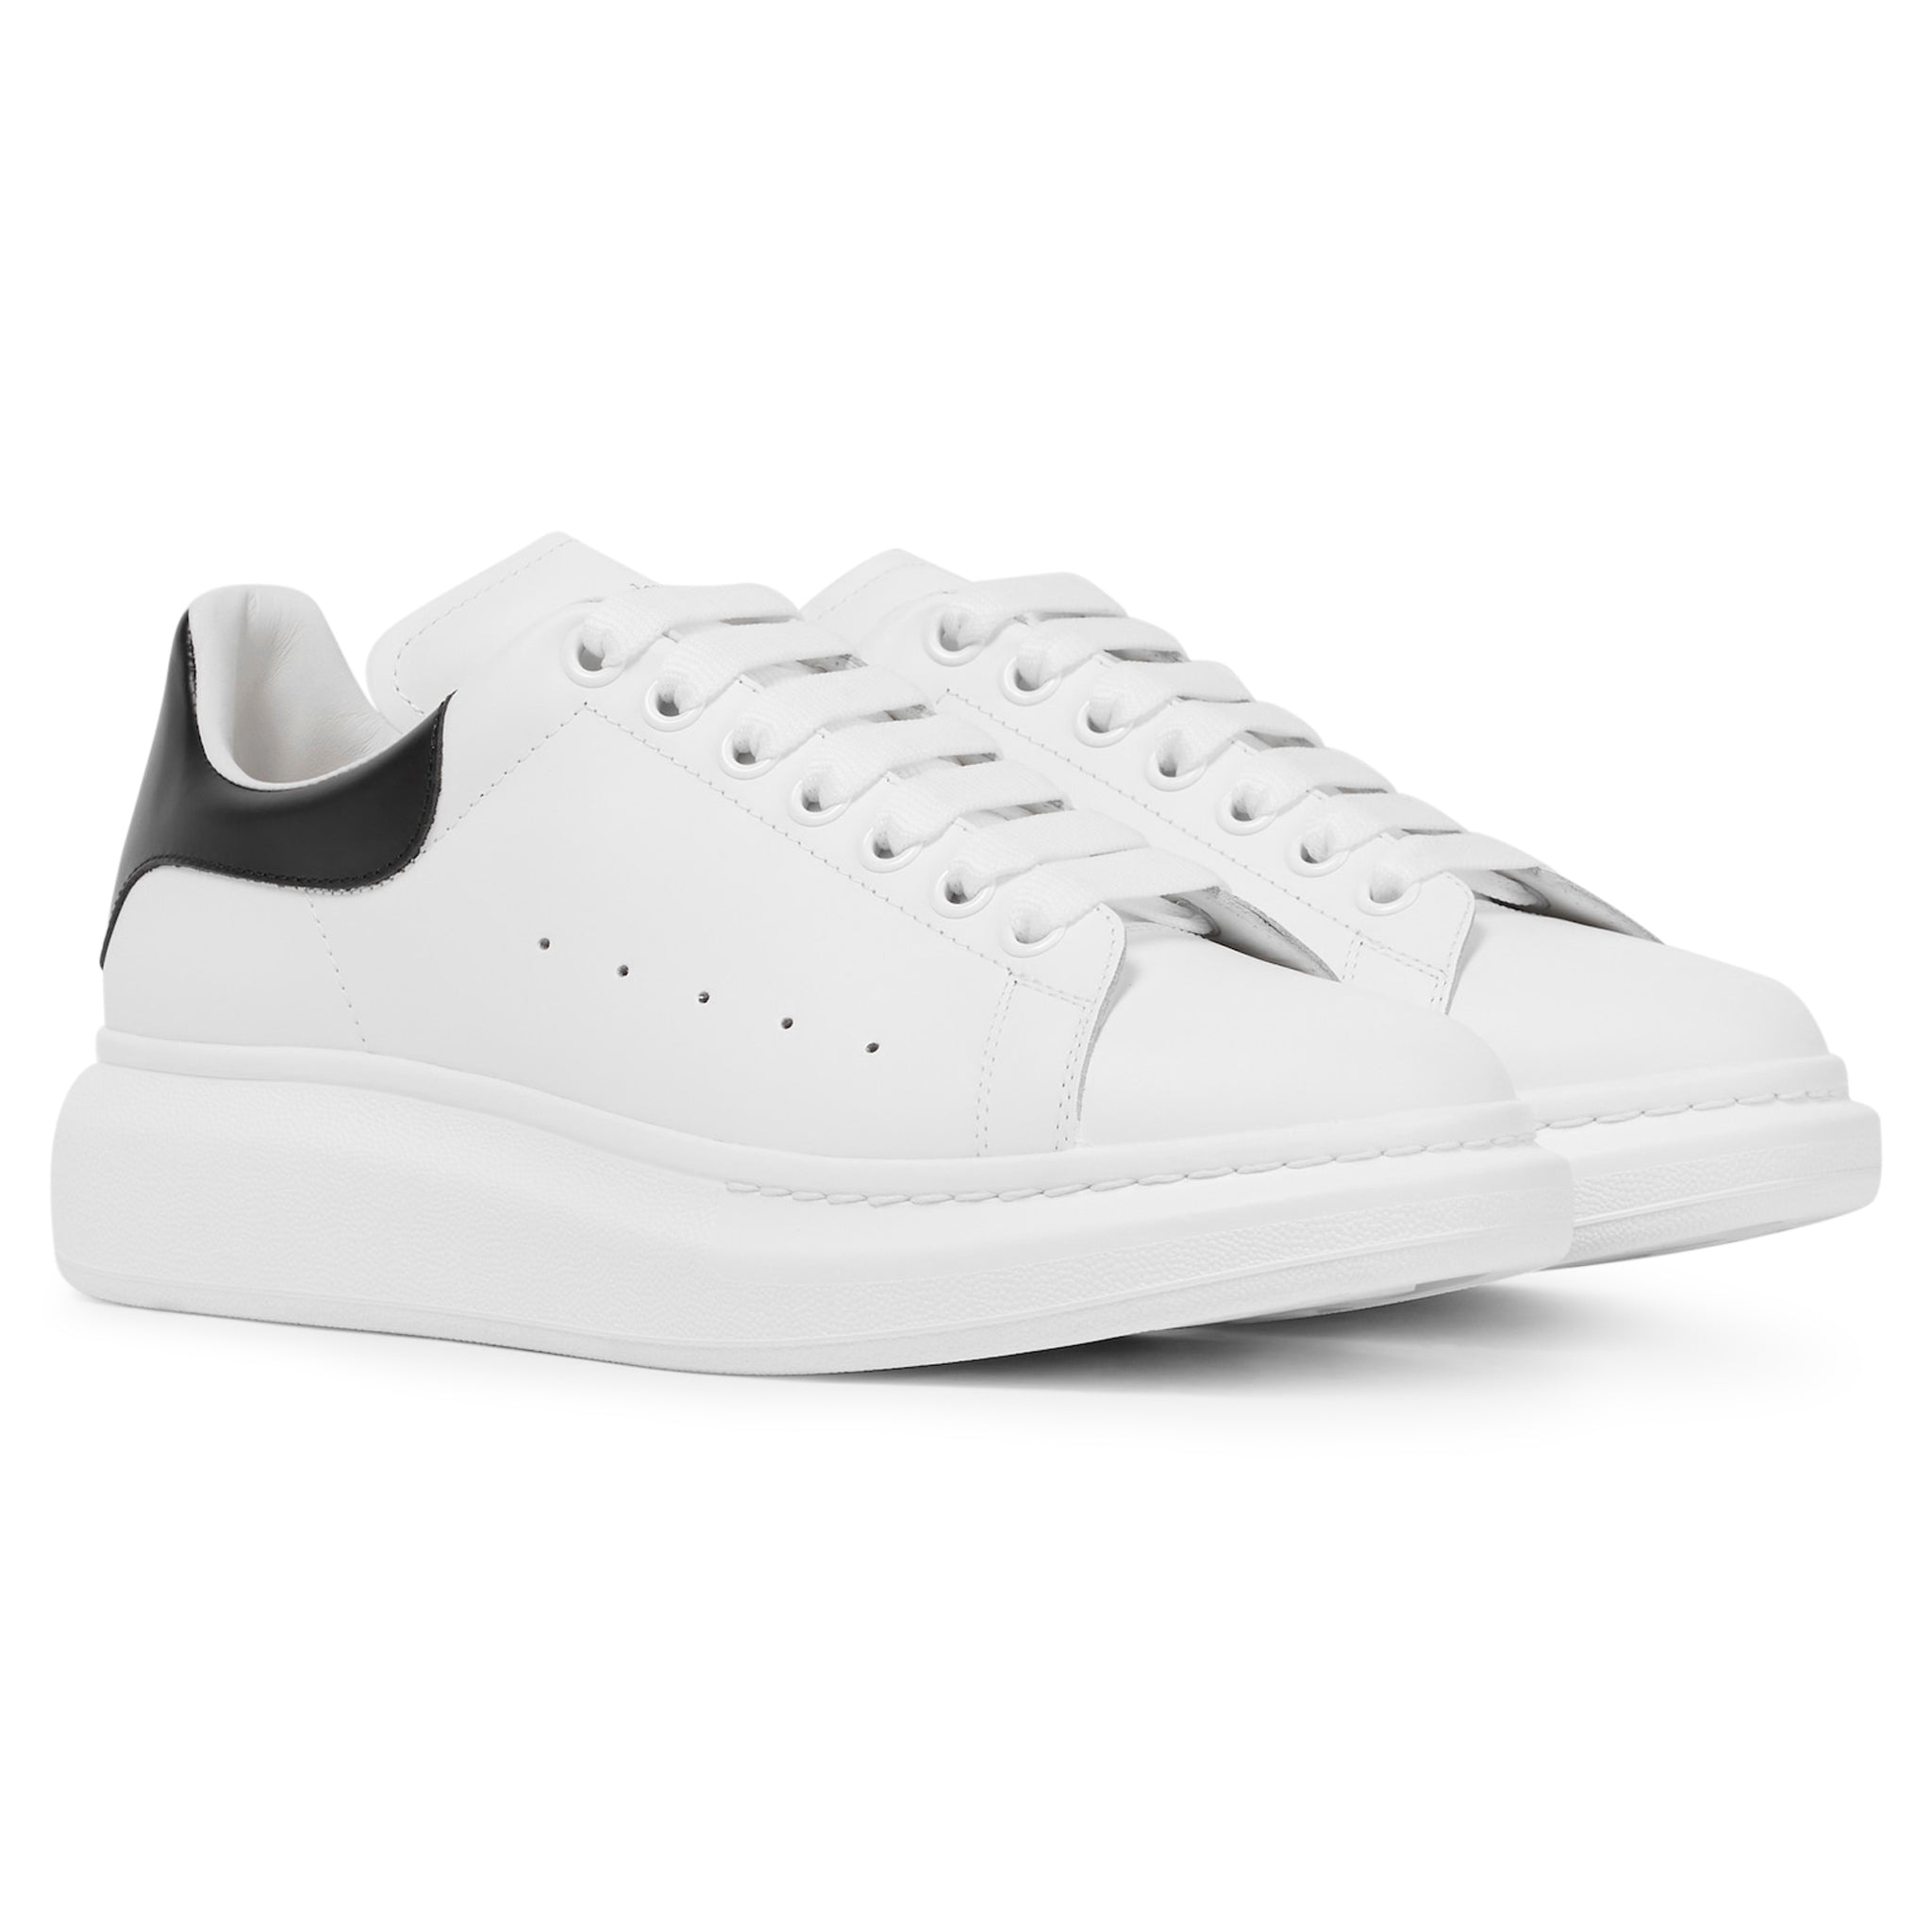 Front view of Alexander Mcqueen Raised Sole White Black Sneaker